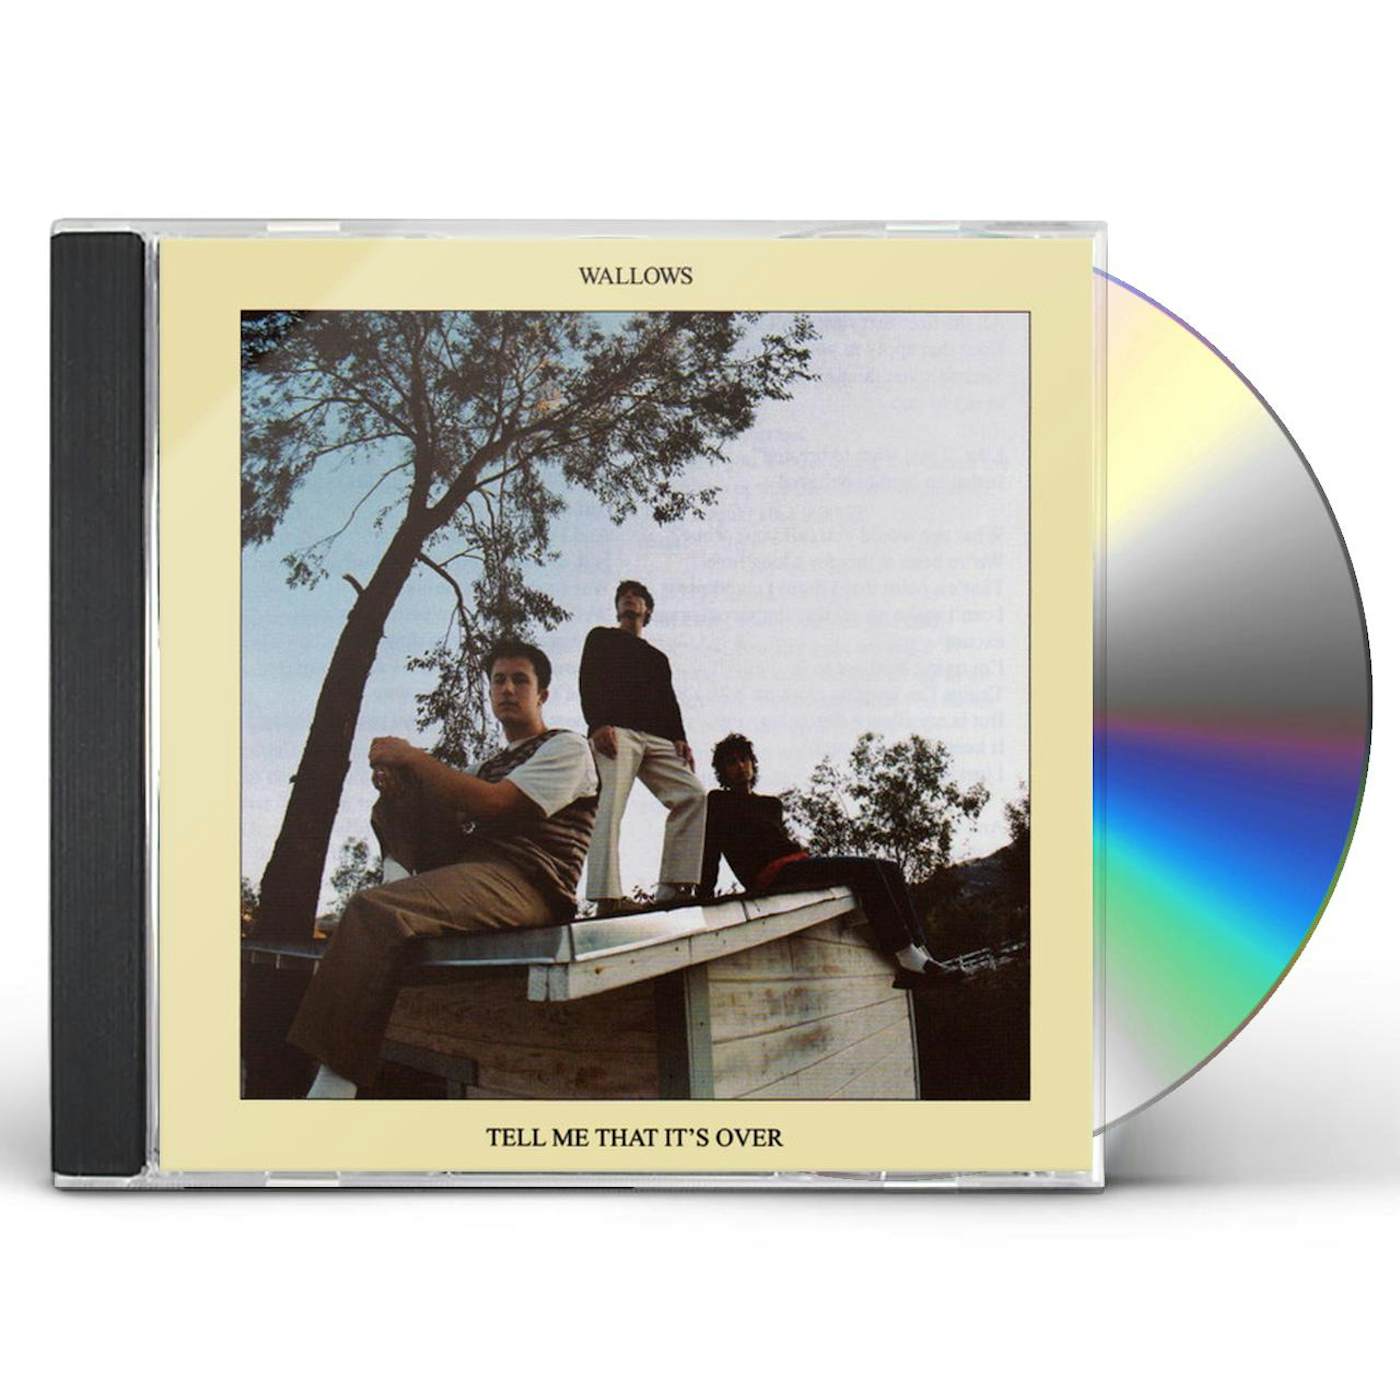 Wallows TELL ME THAT IT'S OVER CD